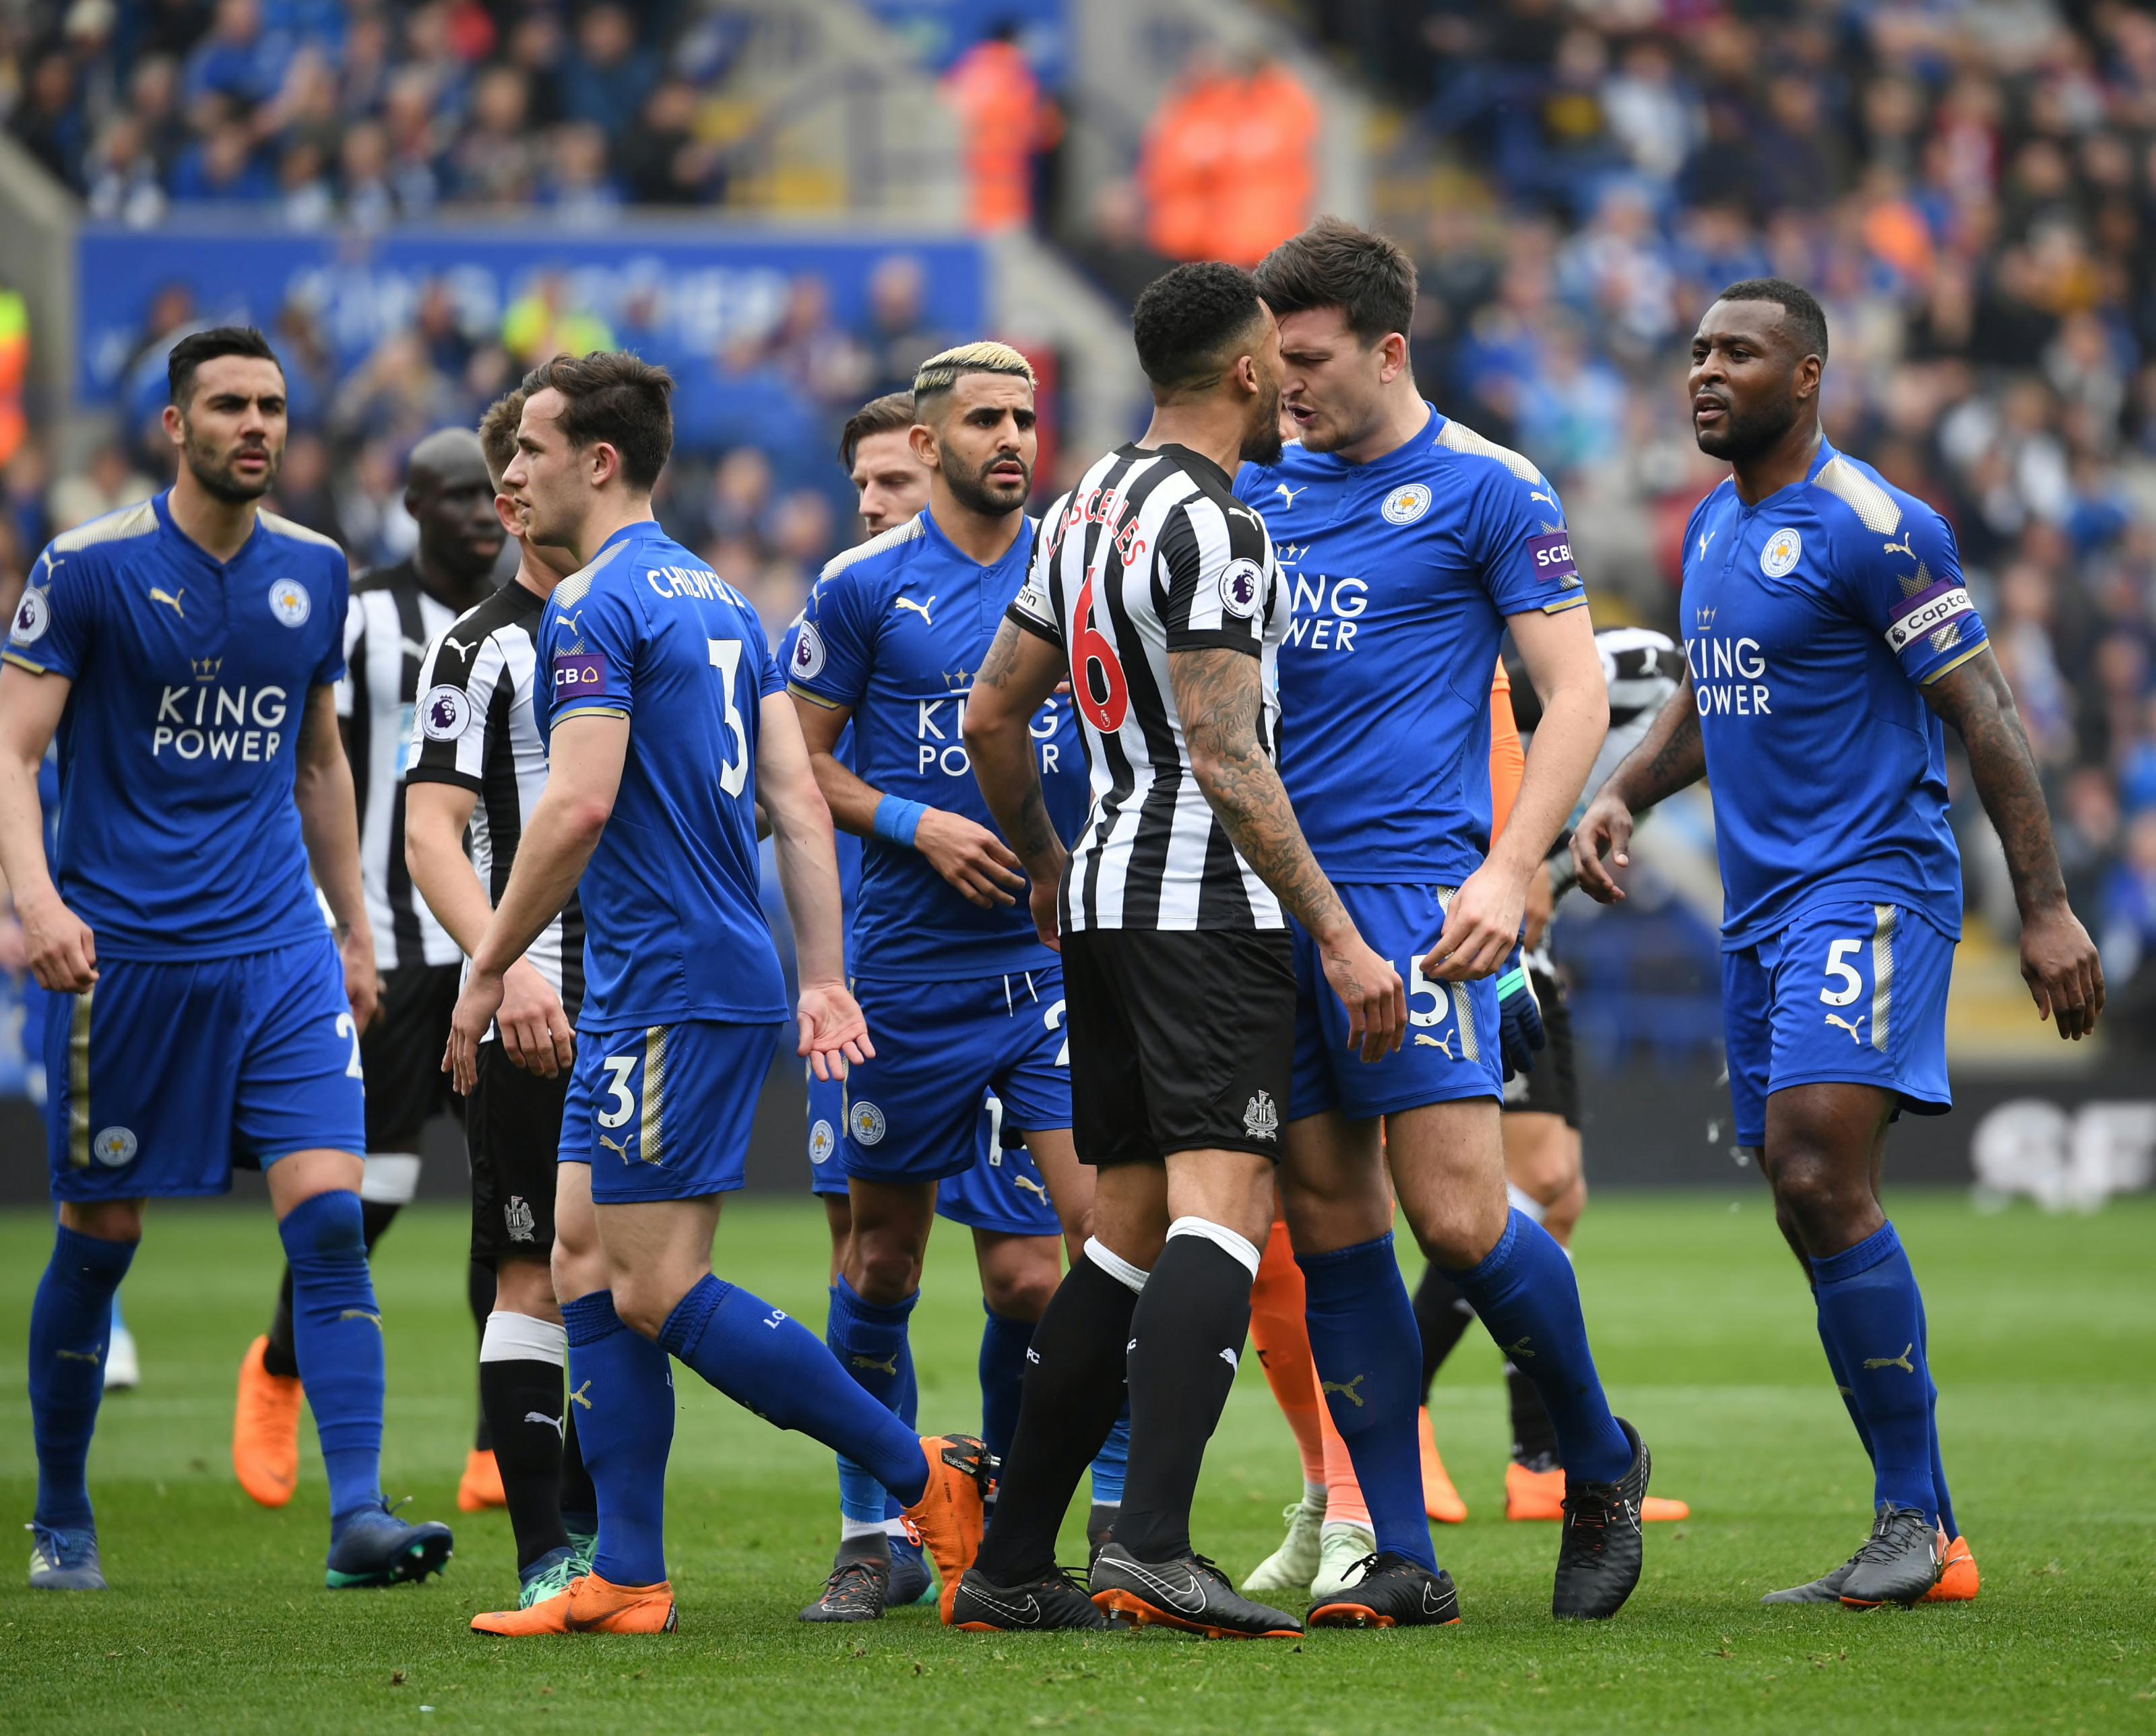 Leicester City 1-2 Newcastle United: The major takeaways